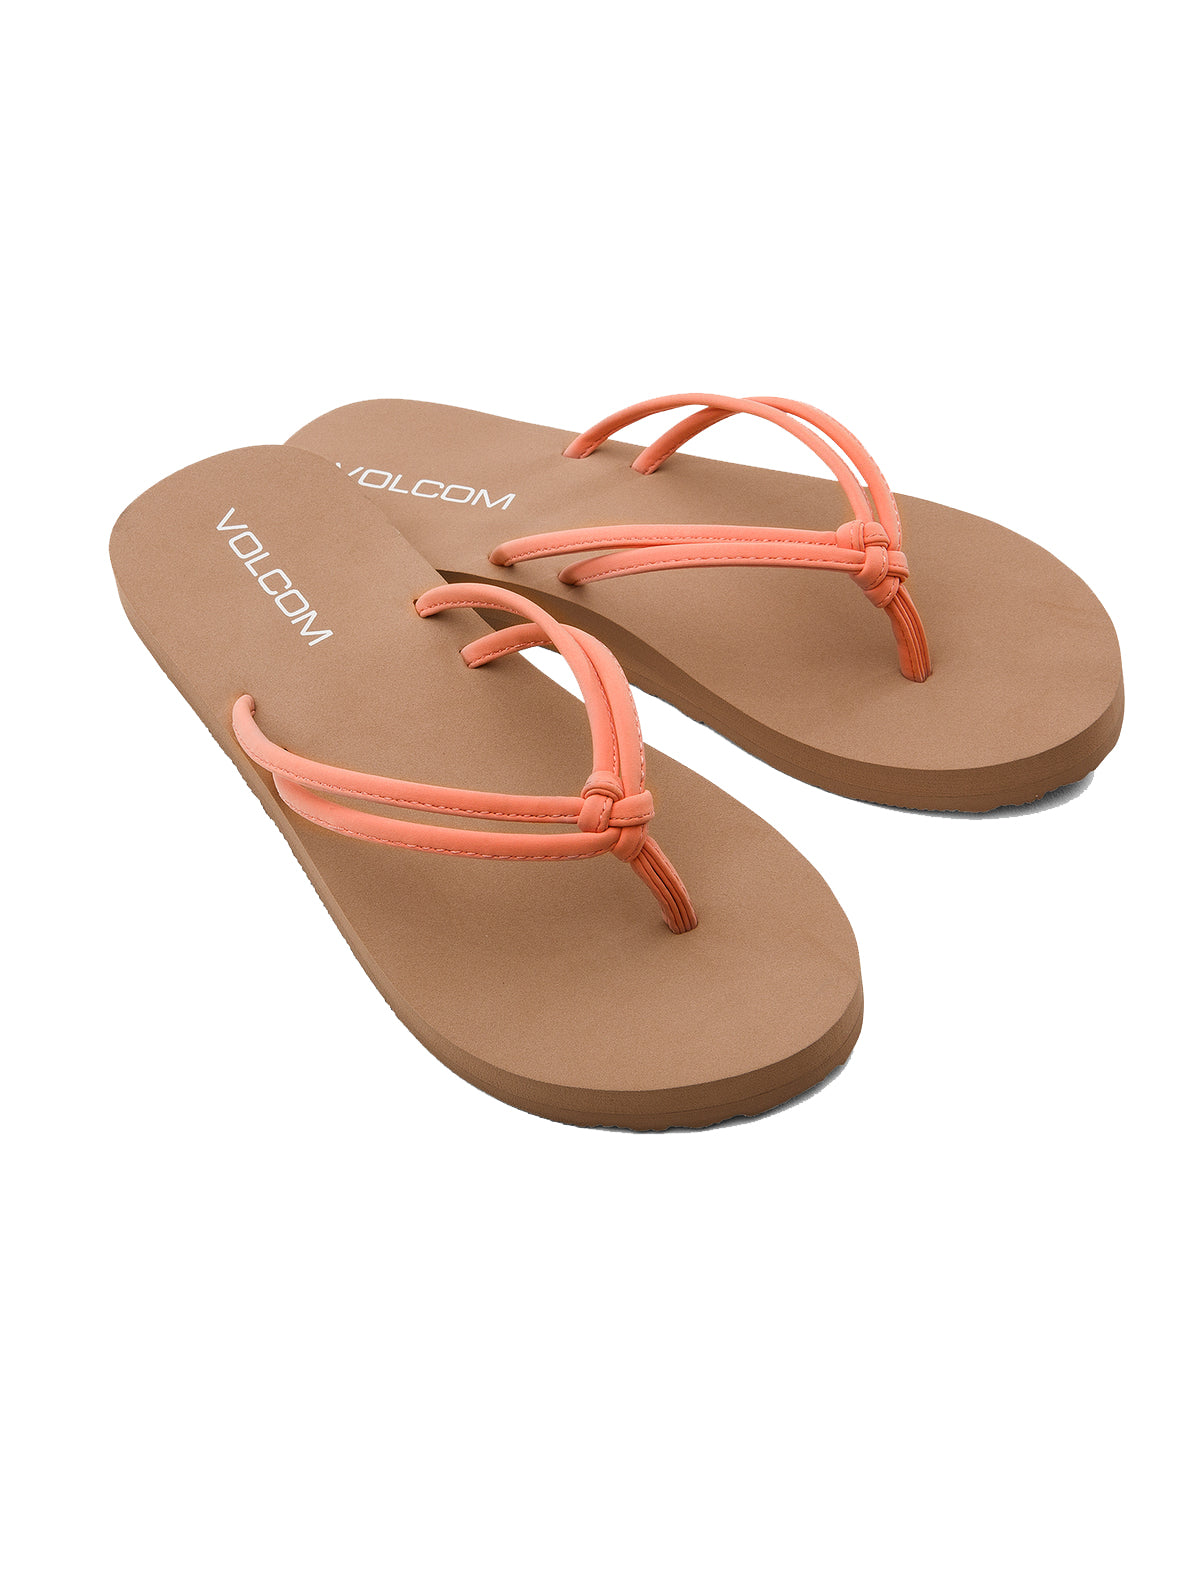 Volcom Forever and Ever Big Youth Girls Sandal PAY-Papaya 13 C